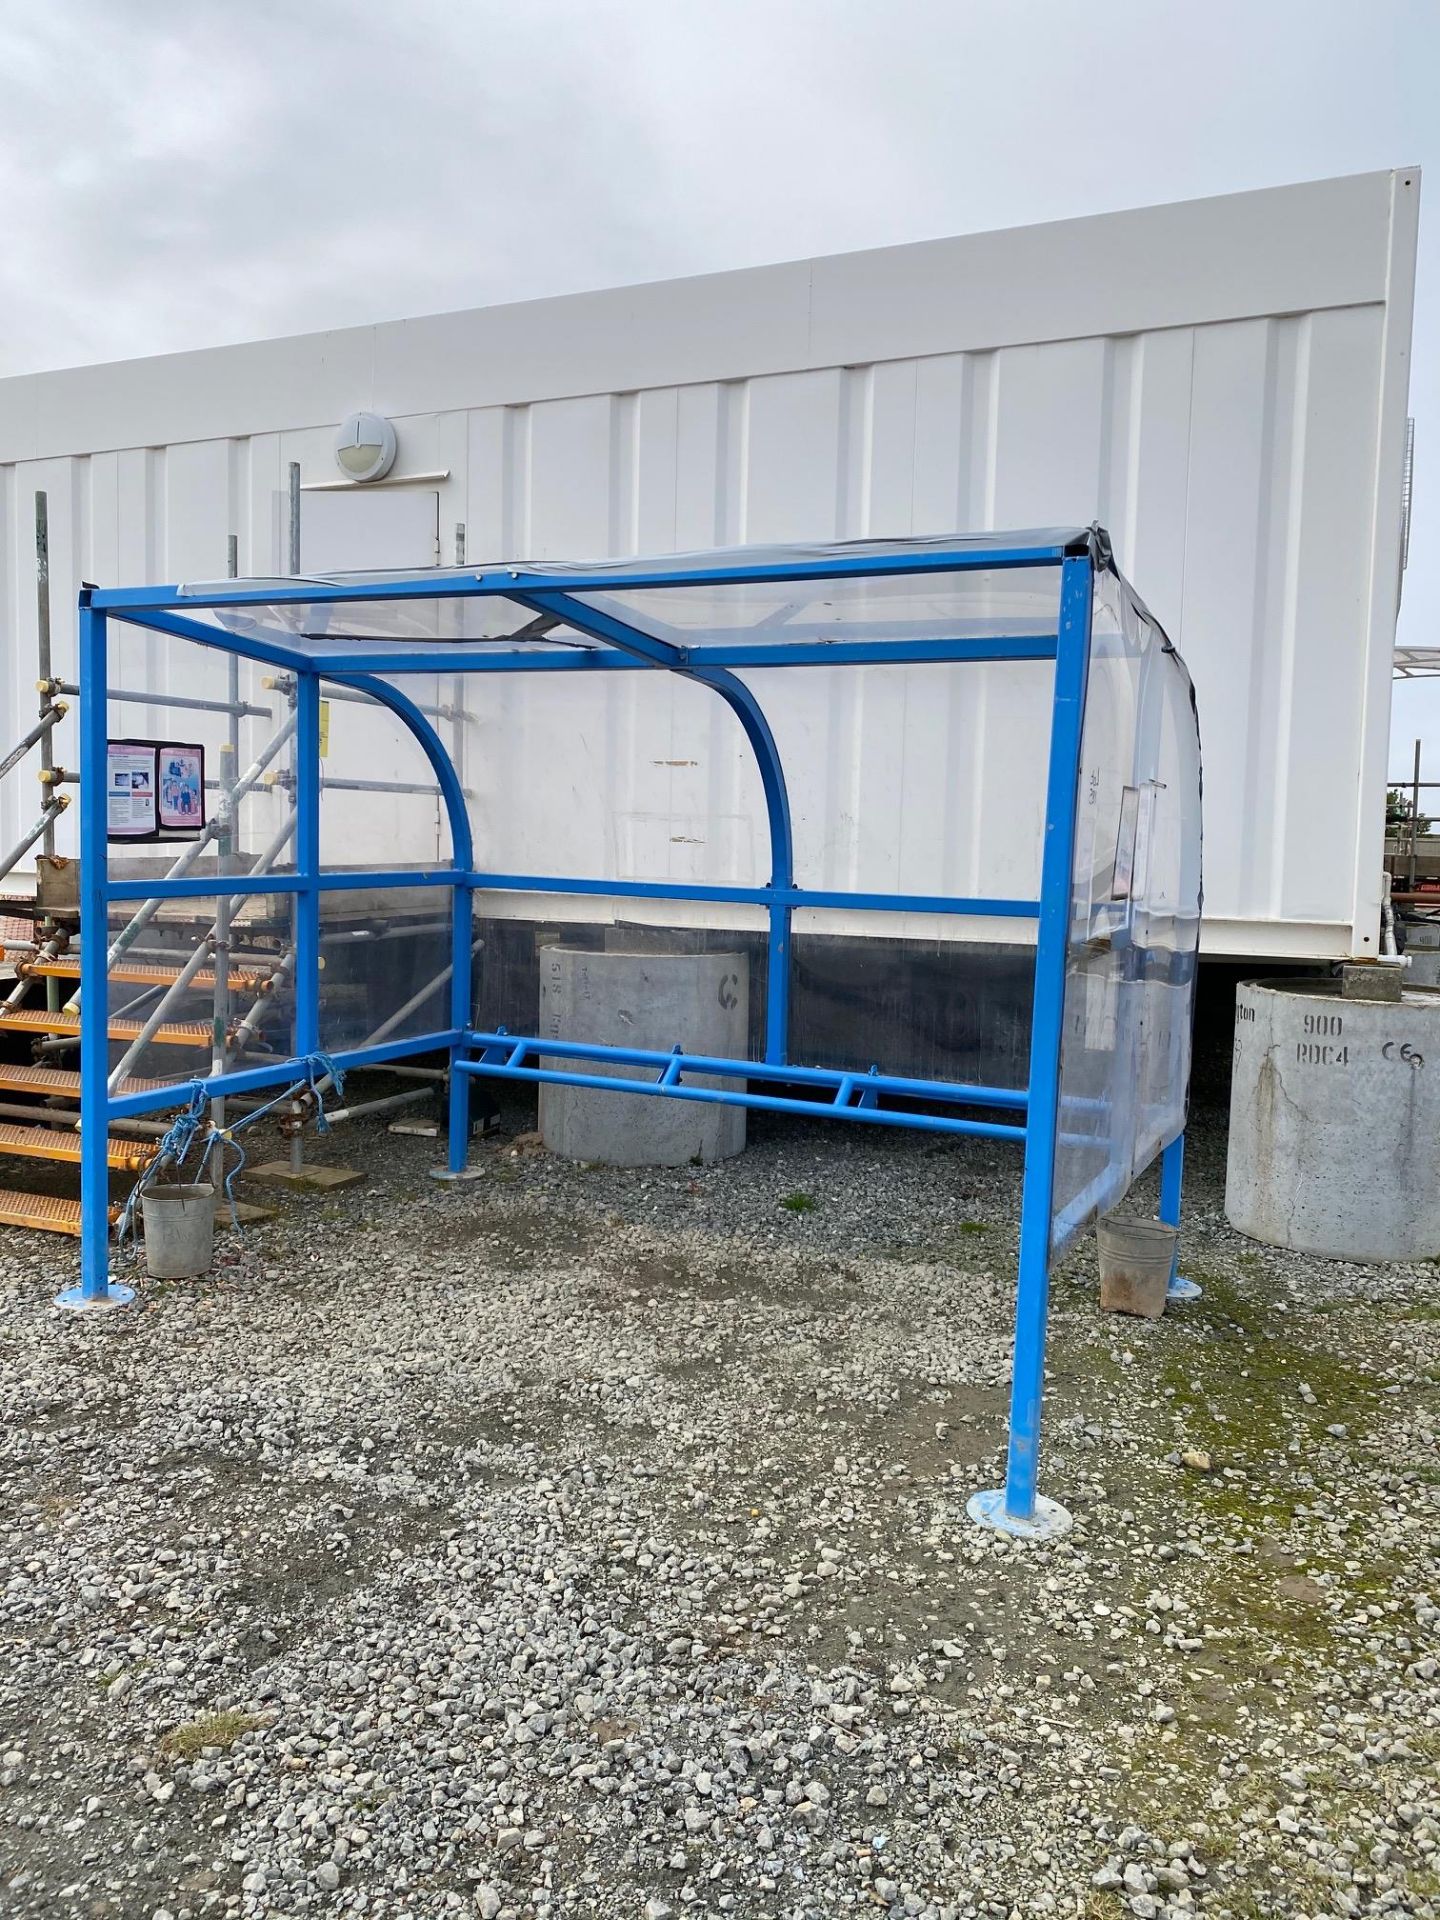 Smoking Shelter Blue Finished Steel Construction, Perch Rail Seat, with Clear Polycarbonate Panels - Image 2 of 3